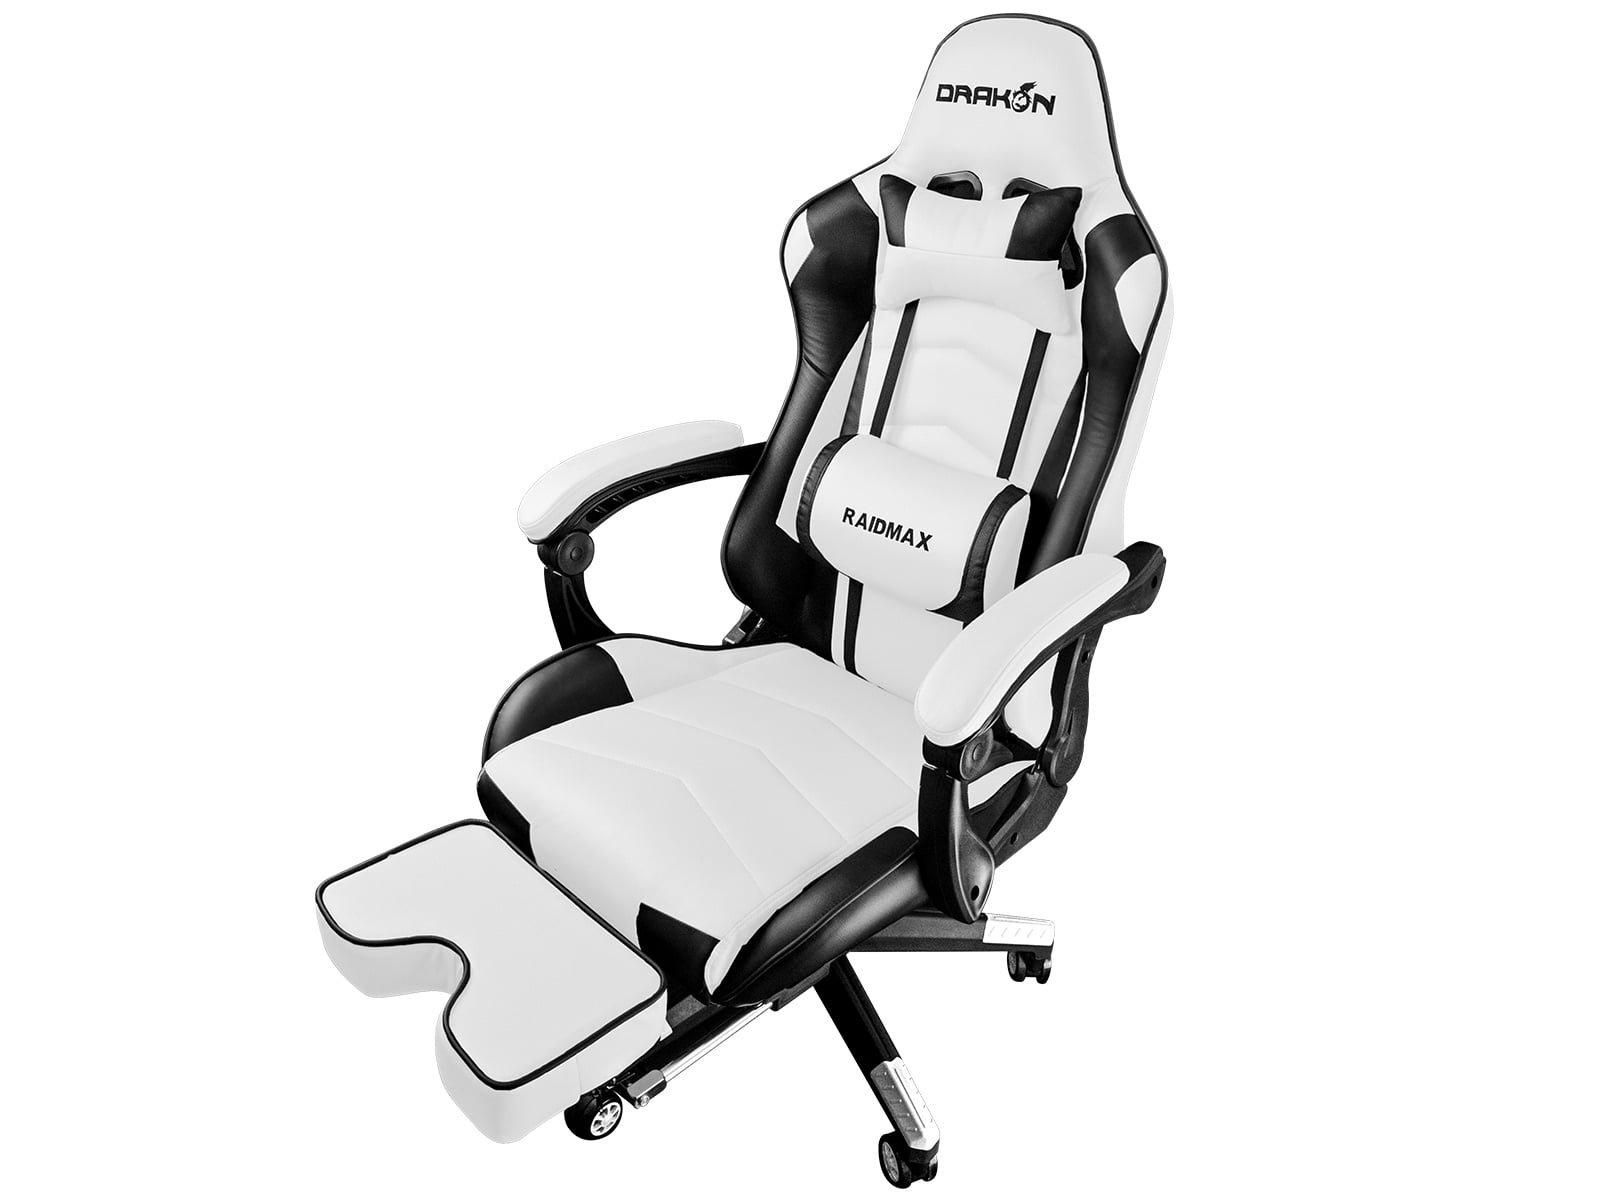 White 260 Drakon DK240 PU Leather Ergonomic Swivel Executive Gaming Racing Office Computer Desk Chair with Headrest